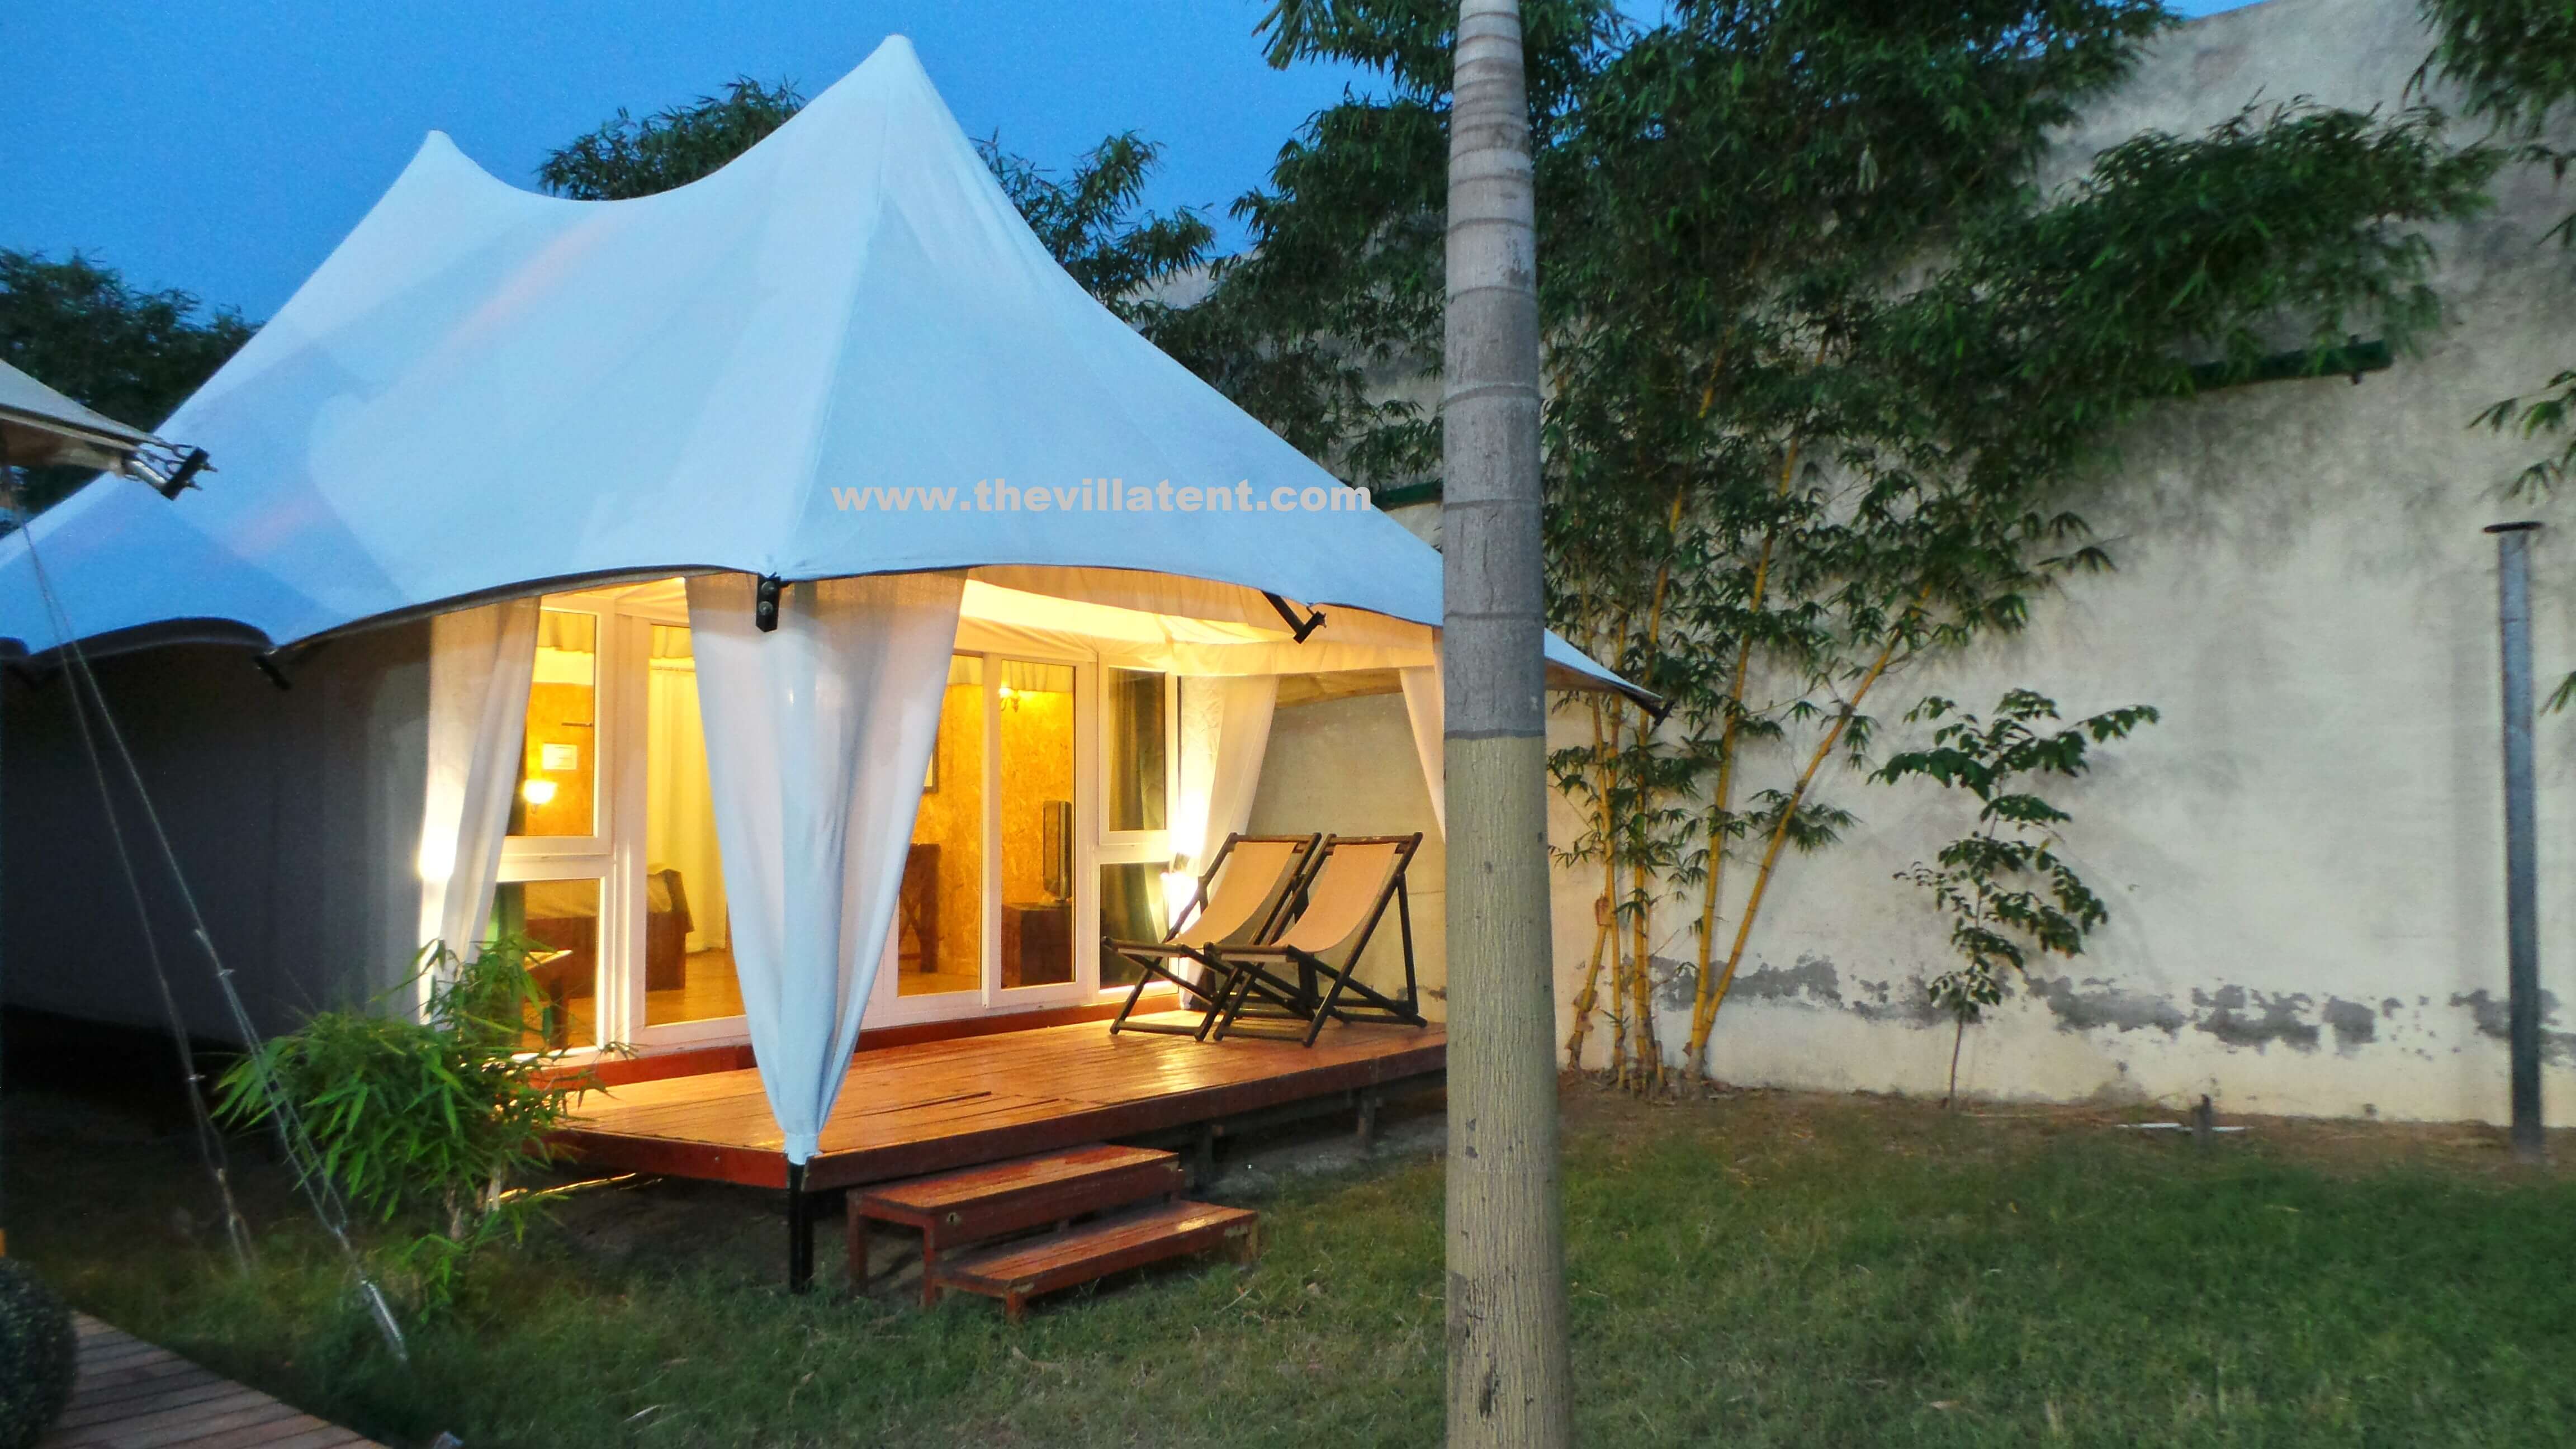 Outdoor Luxury Camping Tents Price House Resort Hotel Home Camping